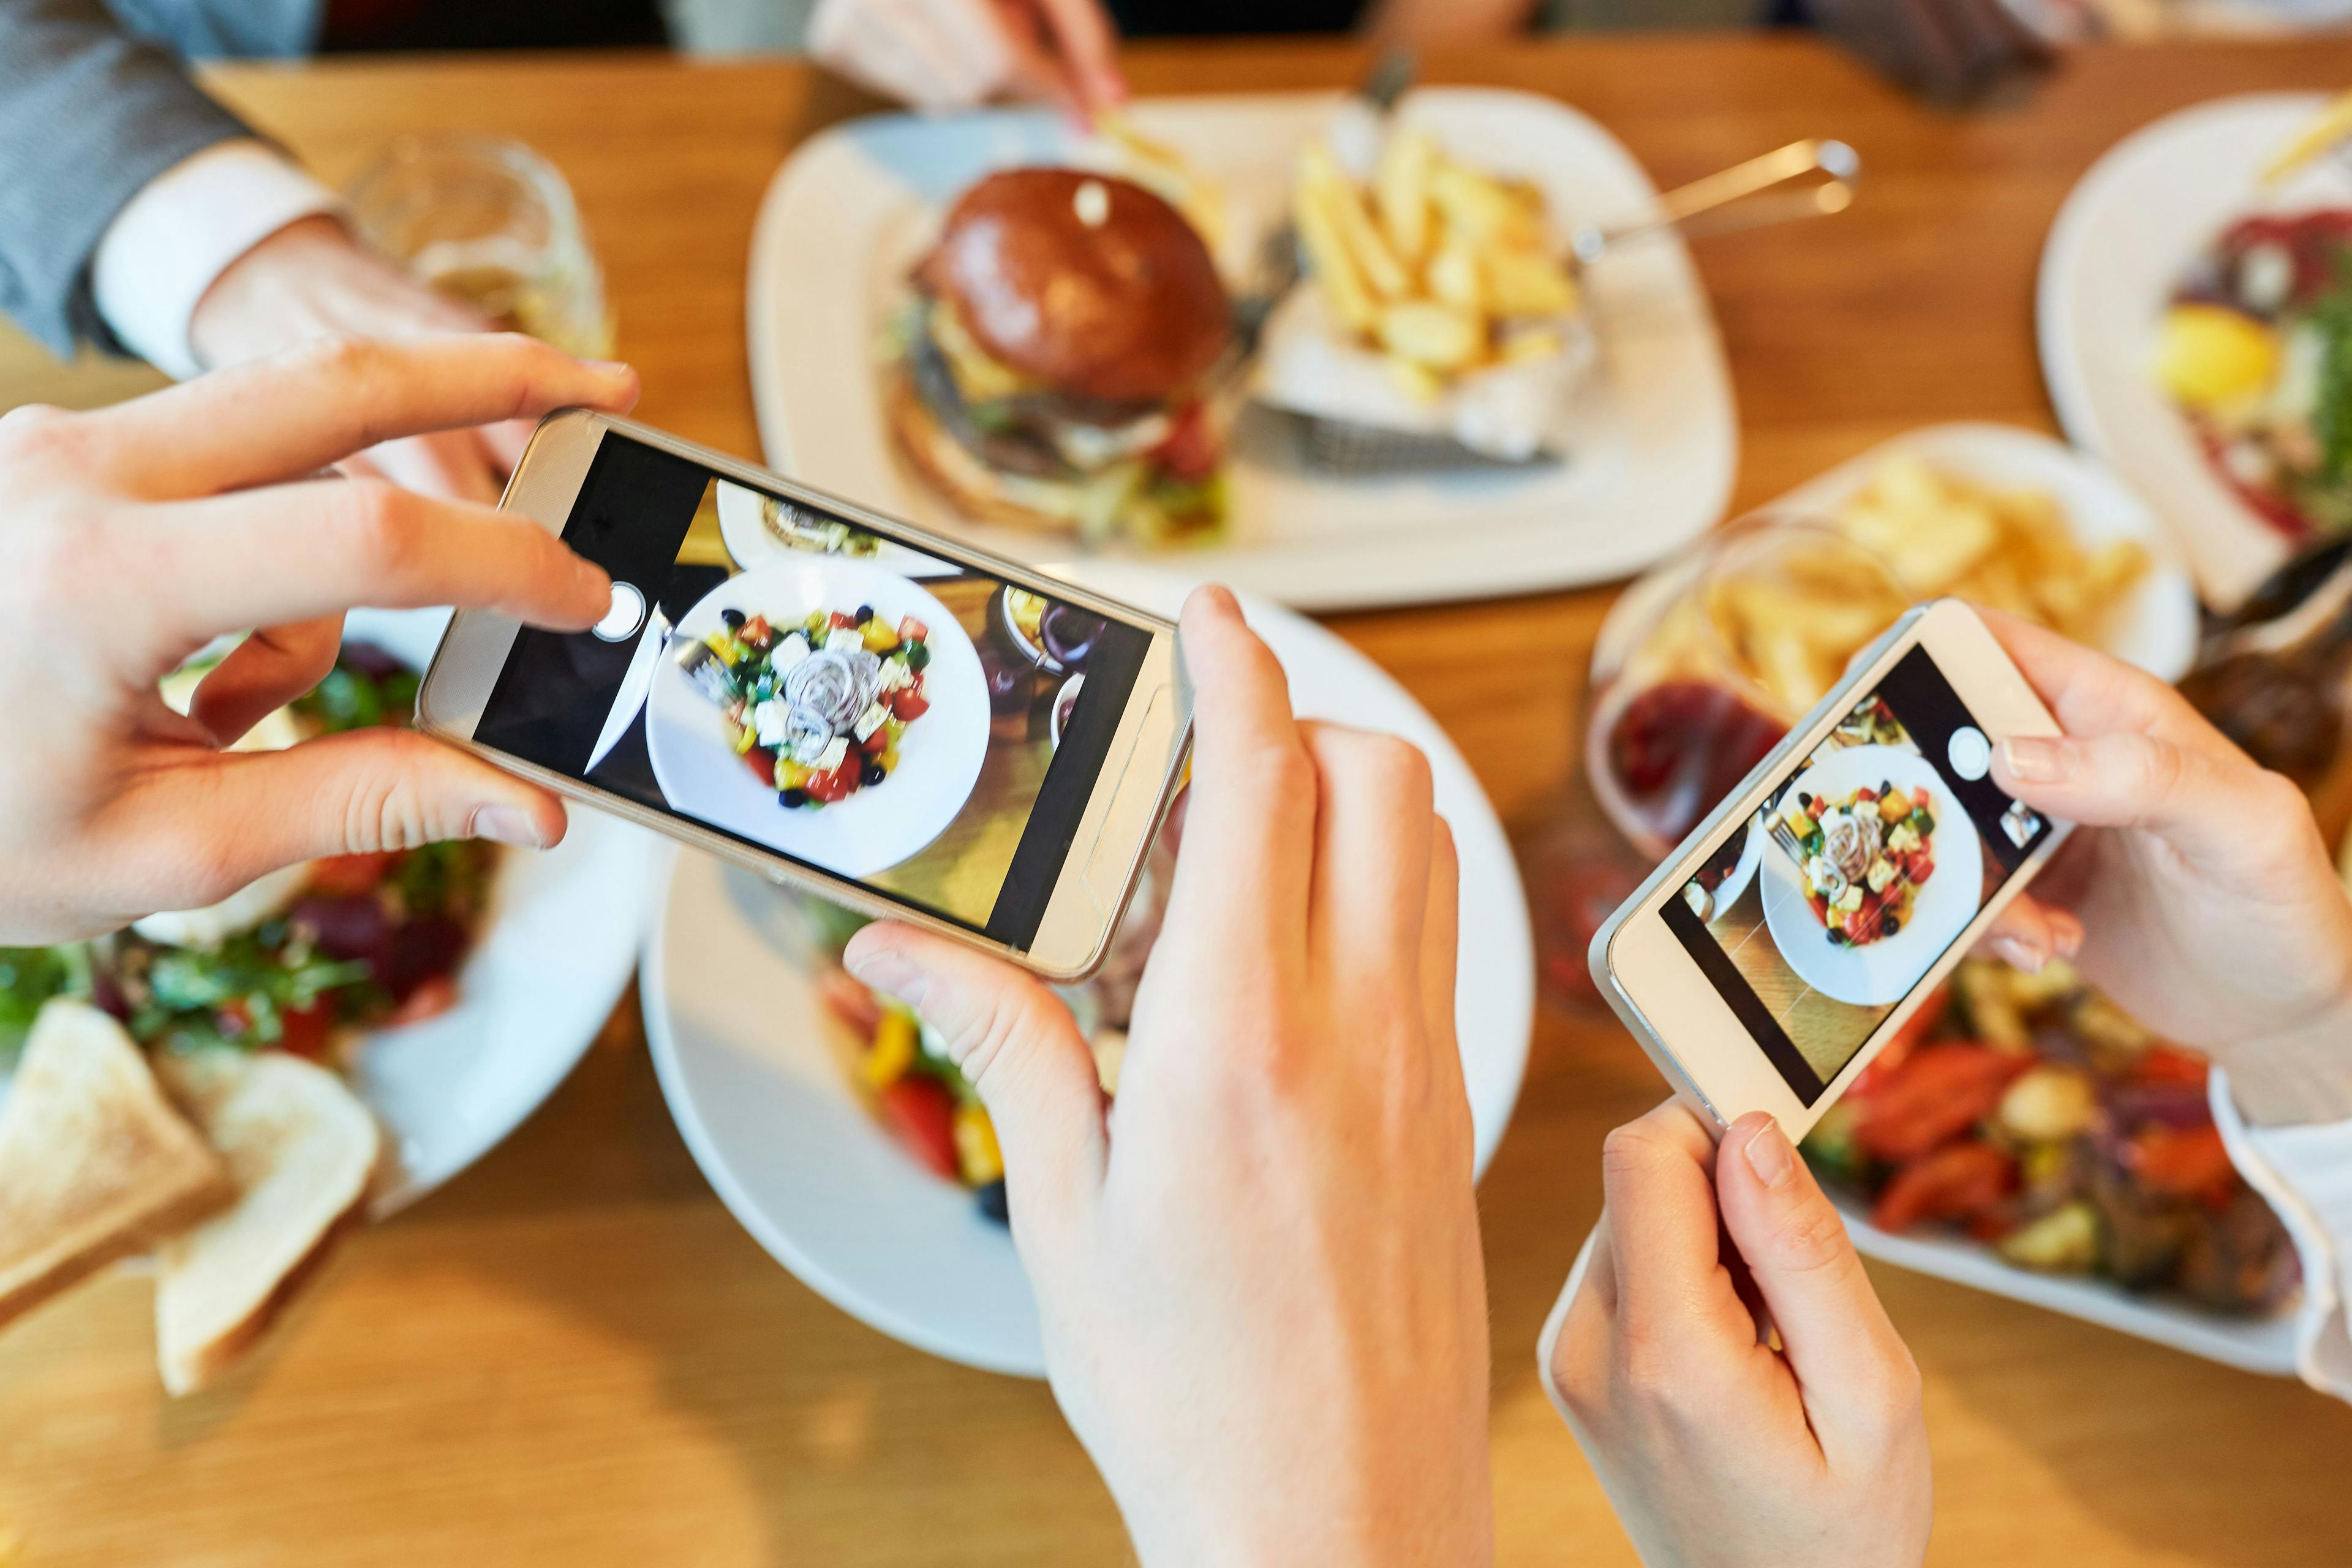 People using their phones to snap pictures of food, sharing their culinary delights on social media.